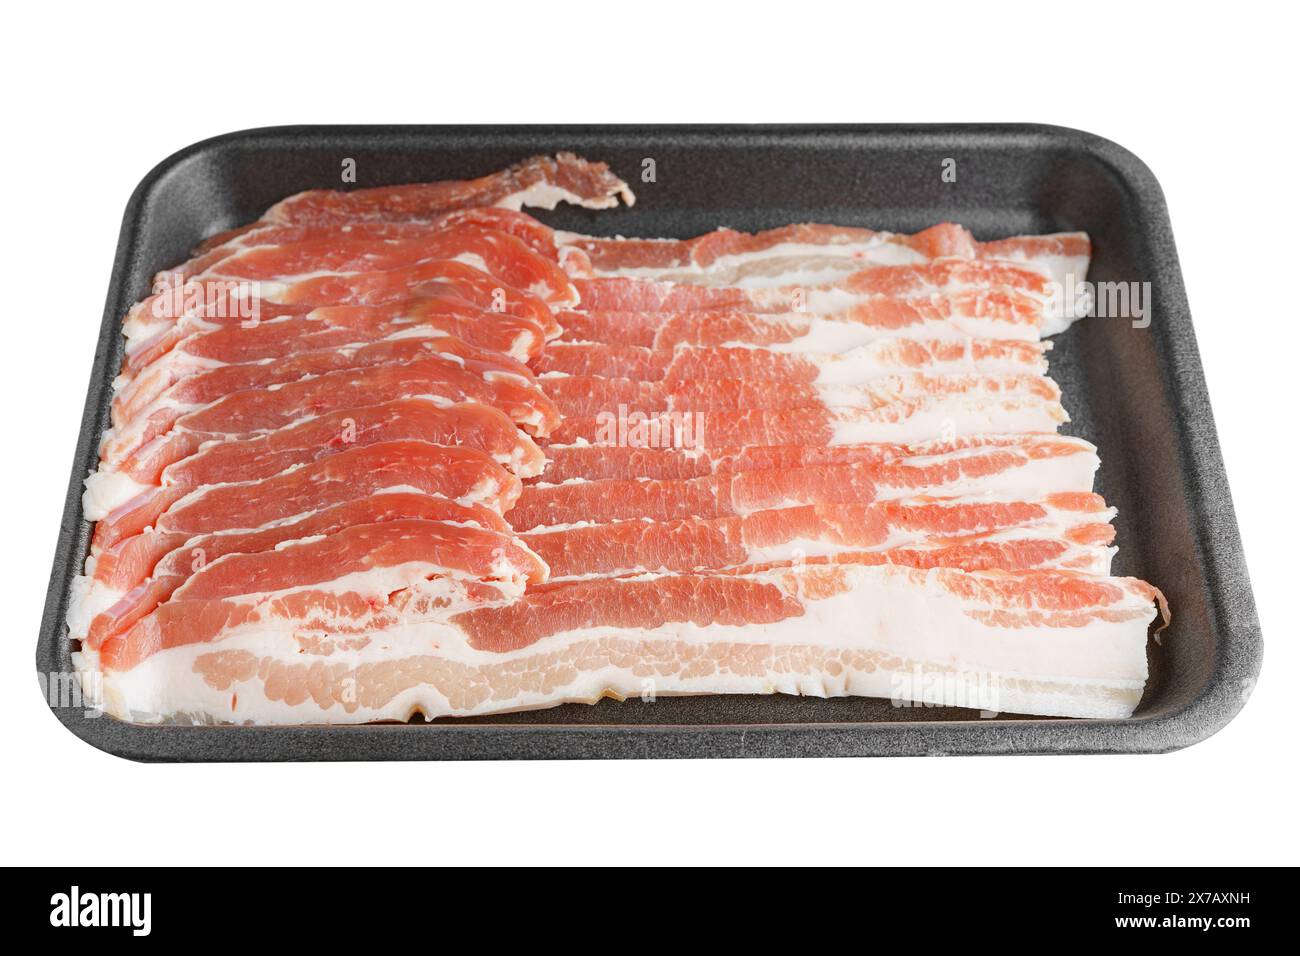 Raw pork bacon in black plastic pack isolated on white background. Streaky brisket slices, fresh thin sliced bacon, food ingredient Stock Photo